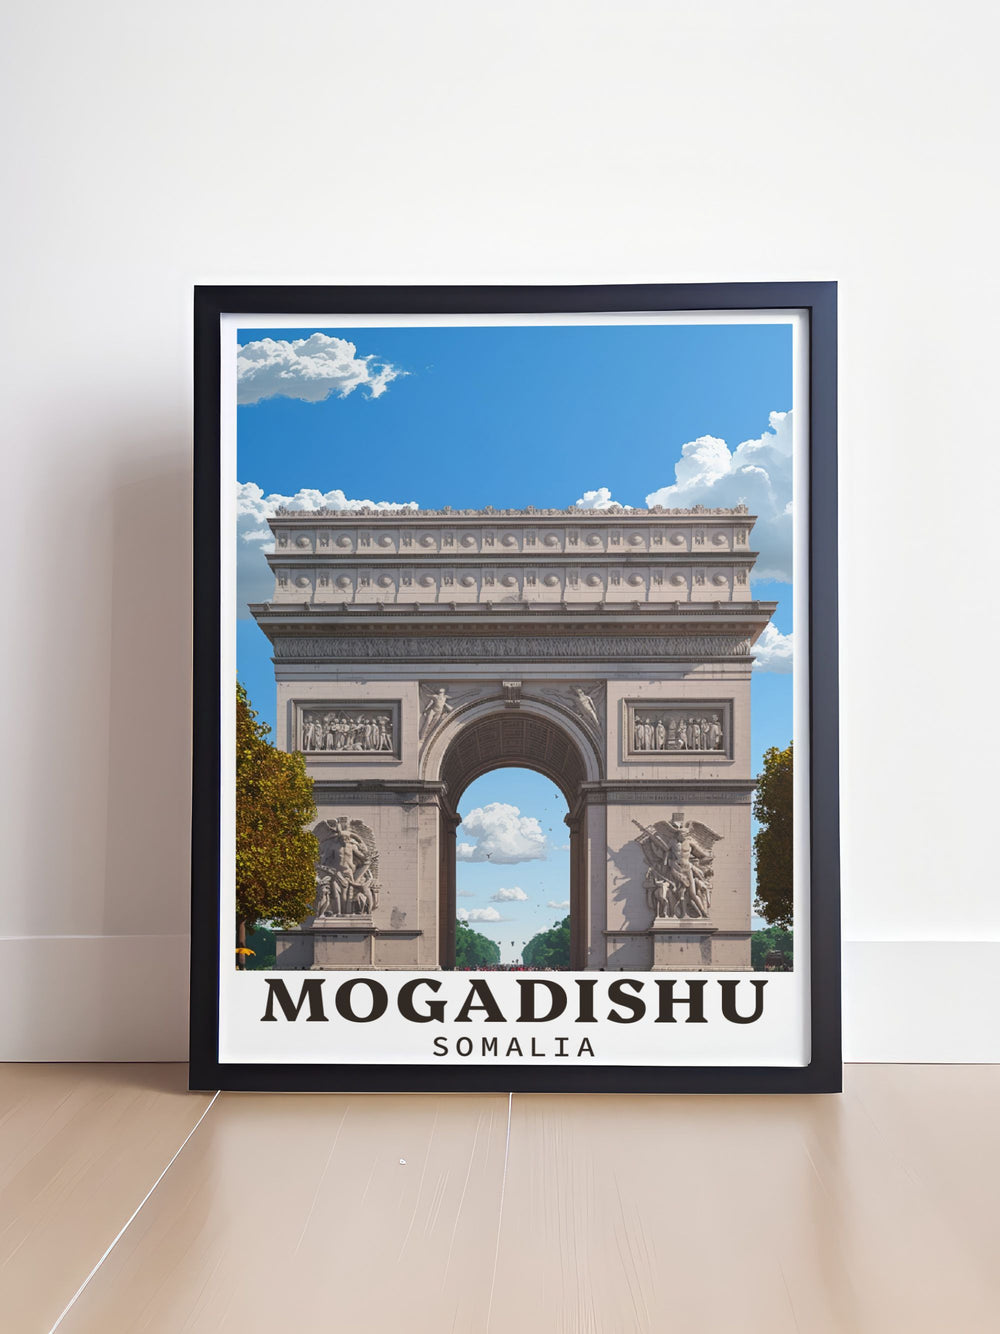 This travel poster highlights the dynamic culture of Mogadishu, inviting viewers to experience the vibrant marketplaces, historic sites, and lively streets of Somalias capital city.